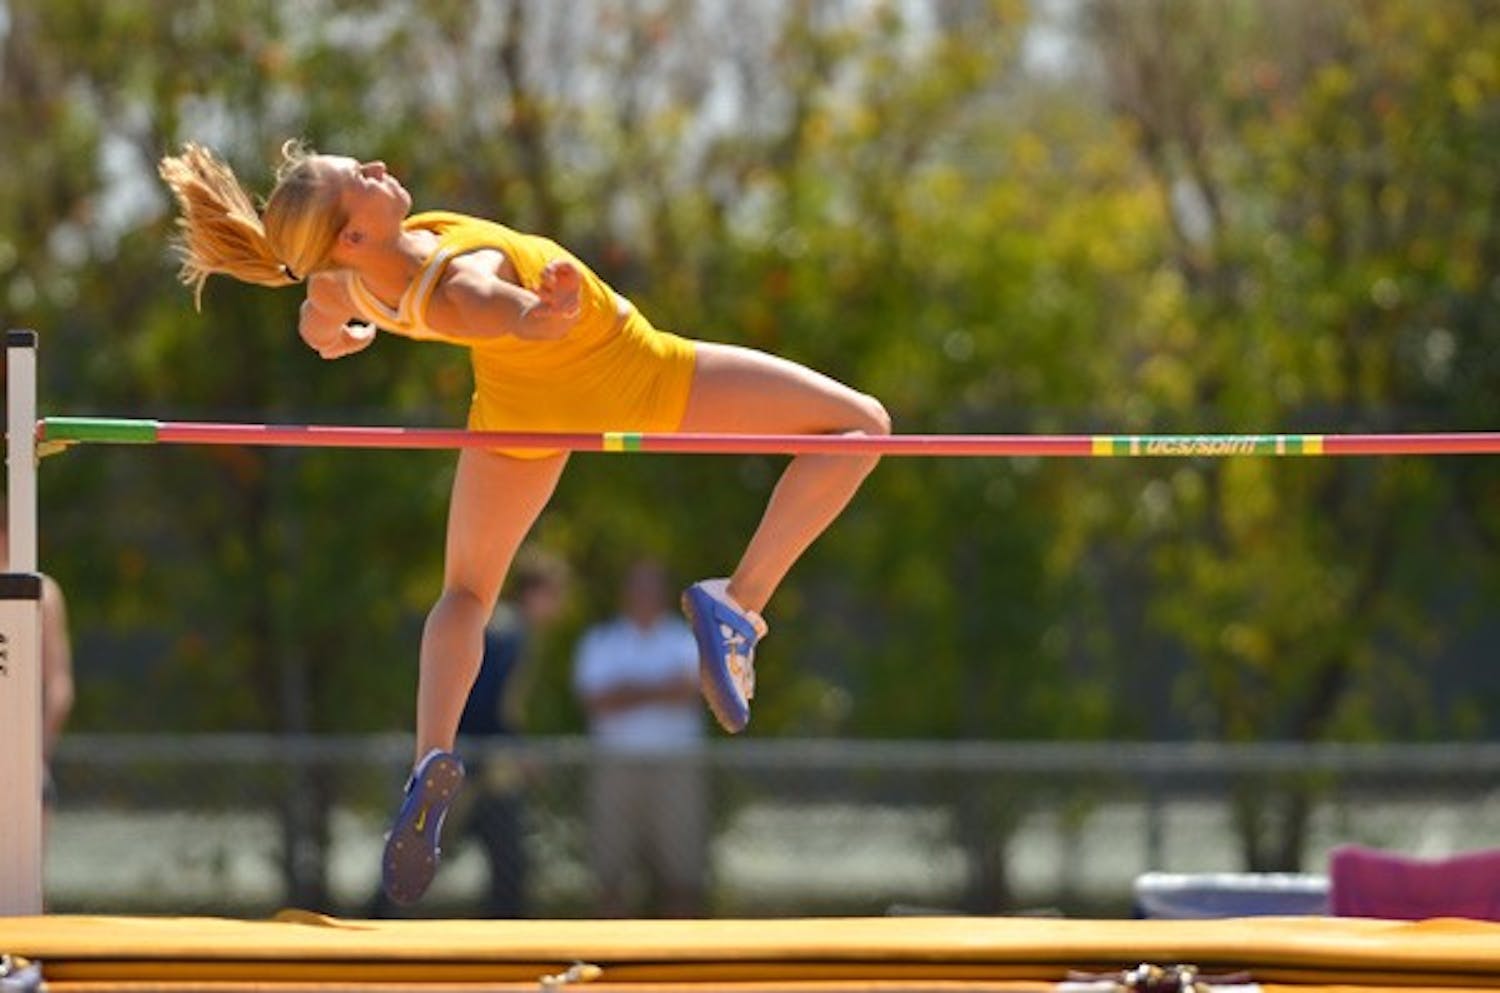 More Travels: ASU senior Samantha Henderson flops over the high bar at the ASU Invite in Tempe on March 26. The Sun Devils travel to the Mt. SAC Relays in Walnut, Calif. on Thursday for the team’s only meet outside Arizona besides the championship season. (Photo by Aaron Lavinsky)